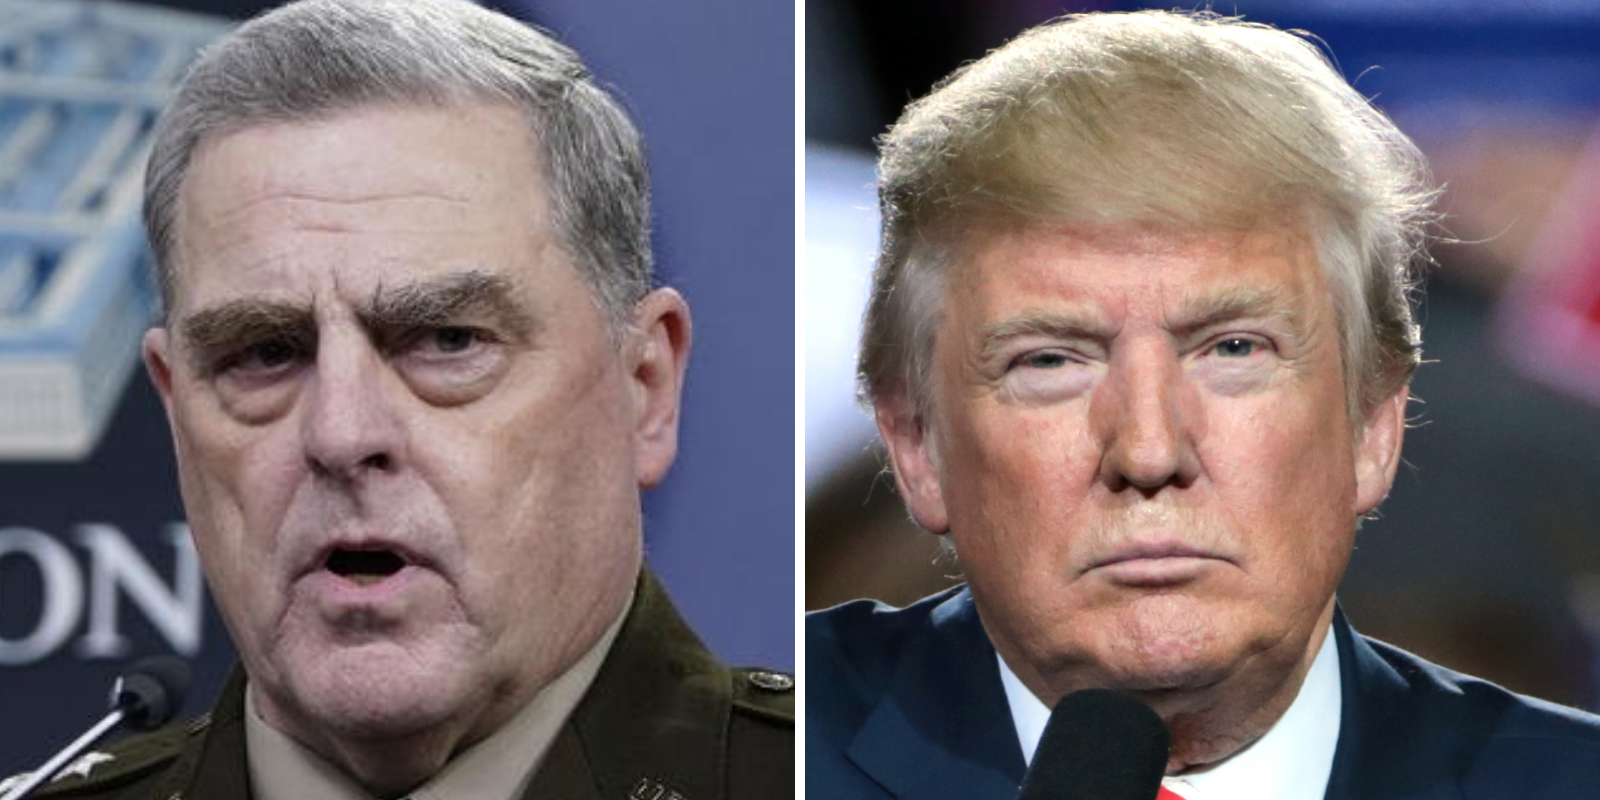 BREAKING: Trump calls for ‘Dumbass’ General Mark Milley to be tried for treason